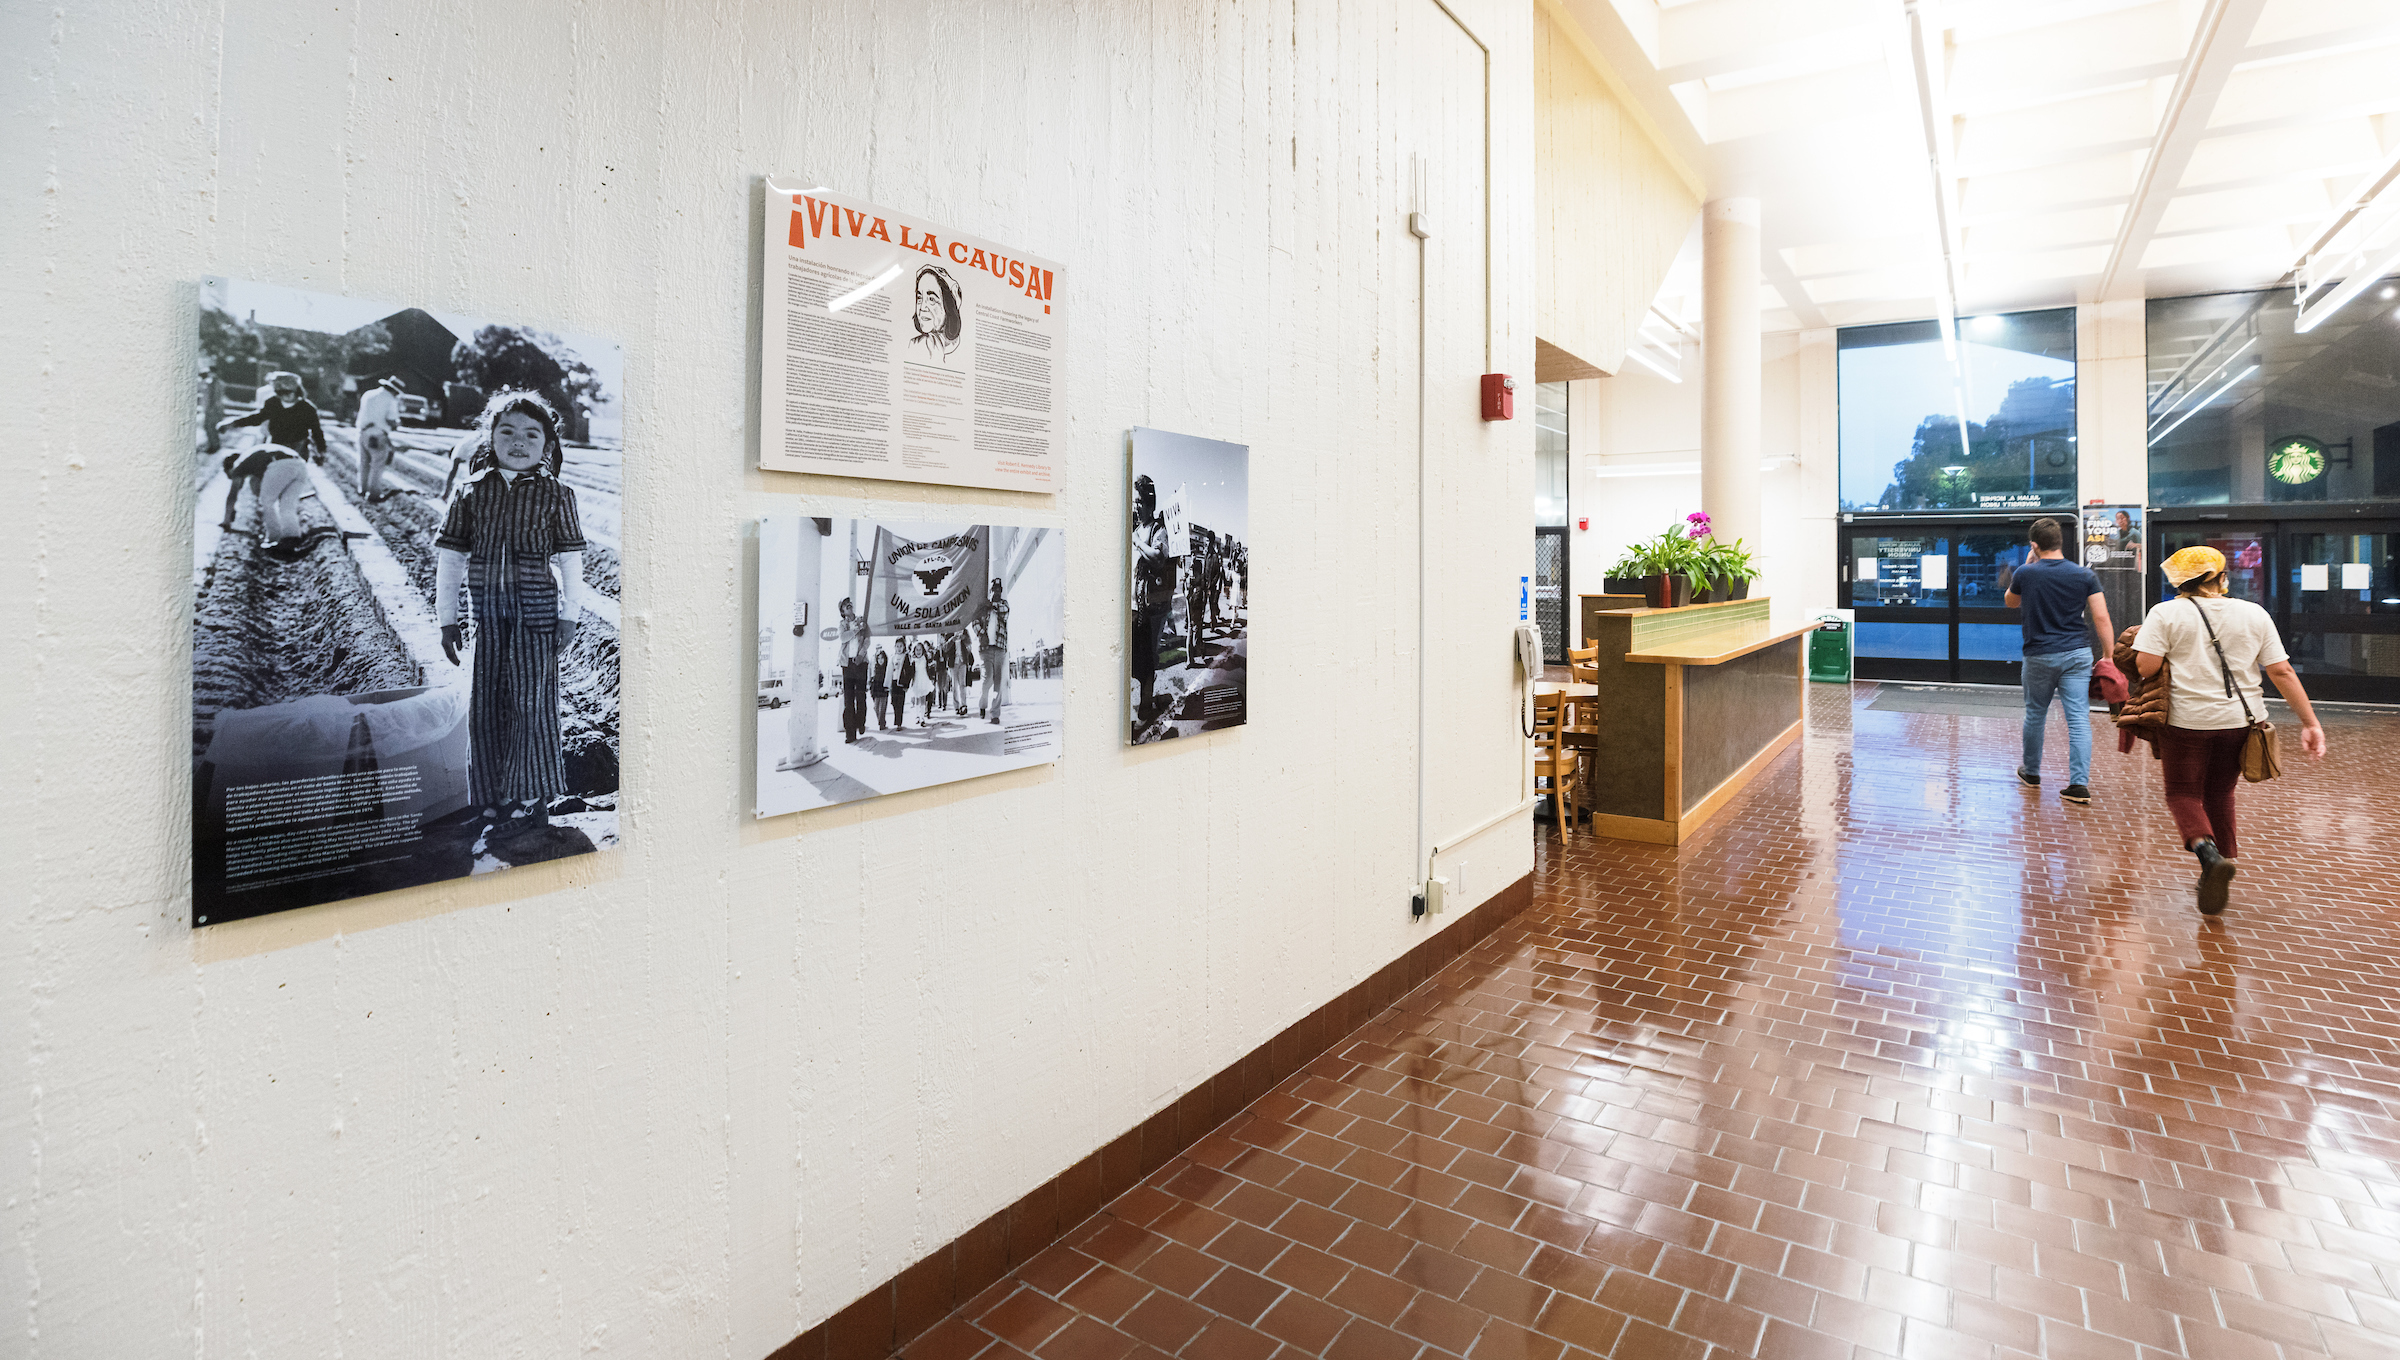 Informational posters about Dolores Huerta on a wall in the University Union.